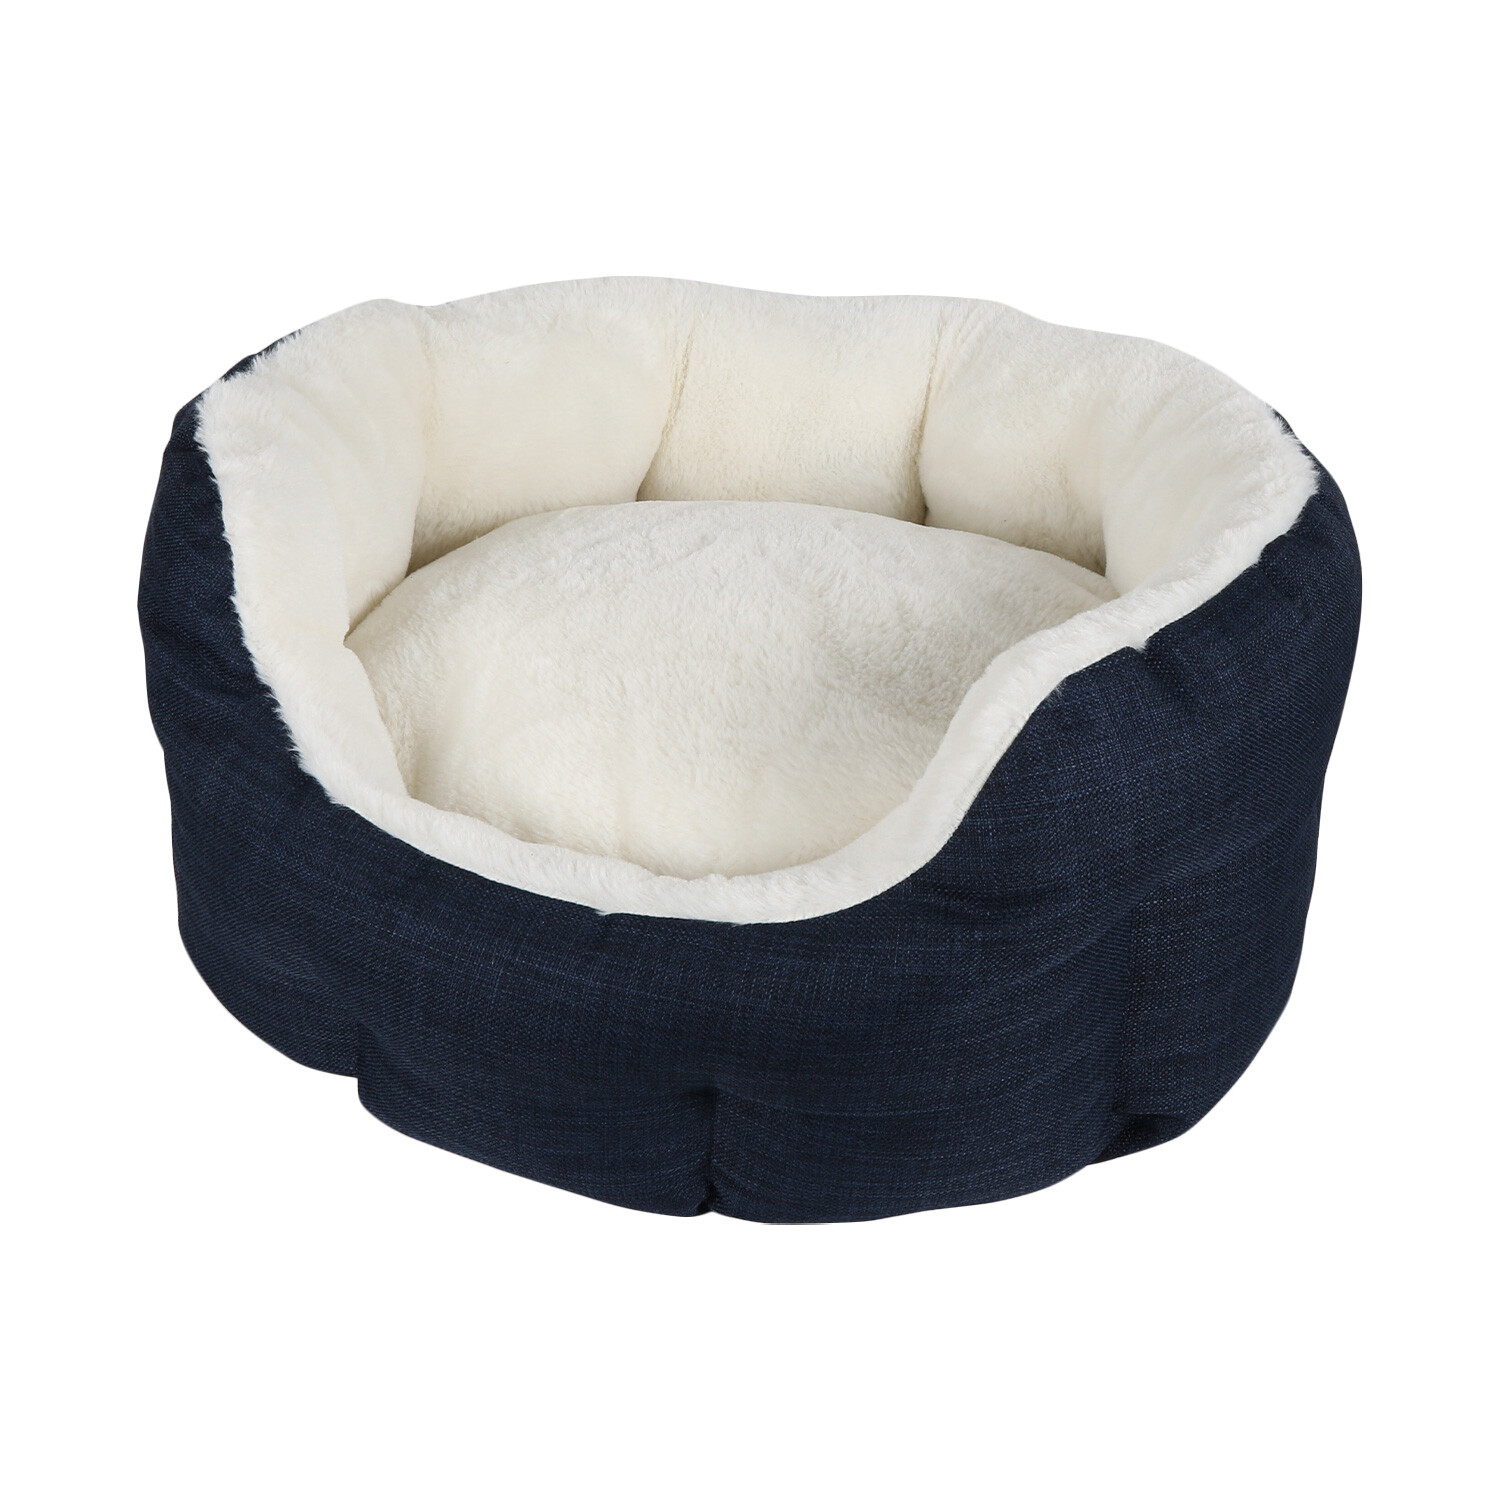 Clever Paws Luxury Small Navy Pet Bed Image 1